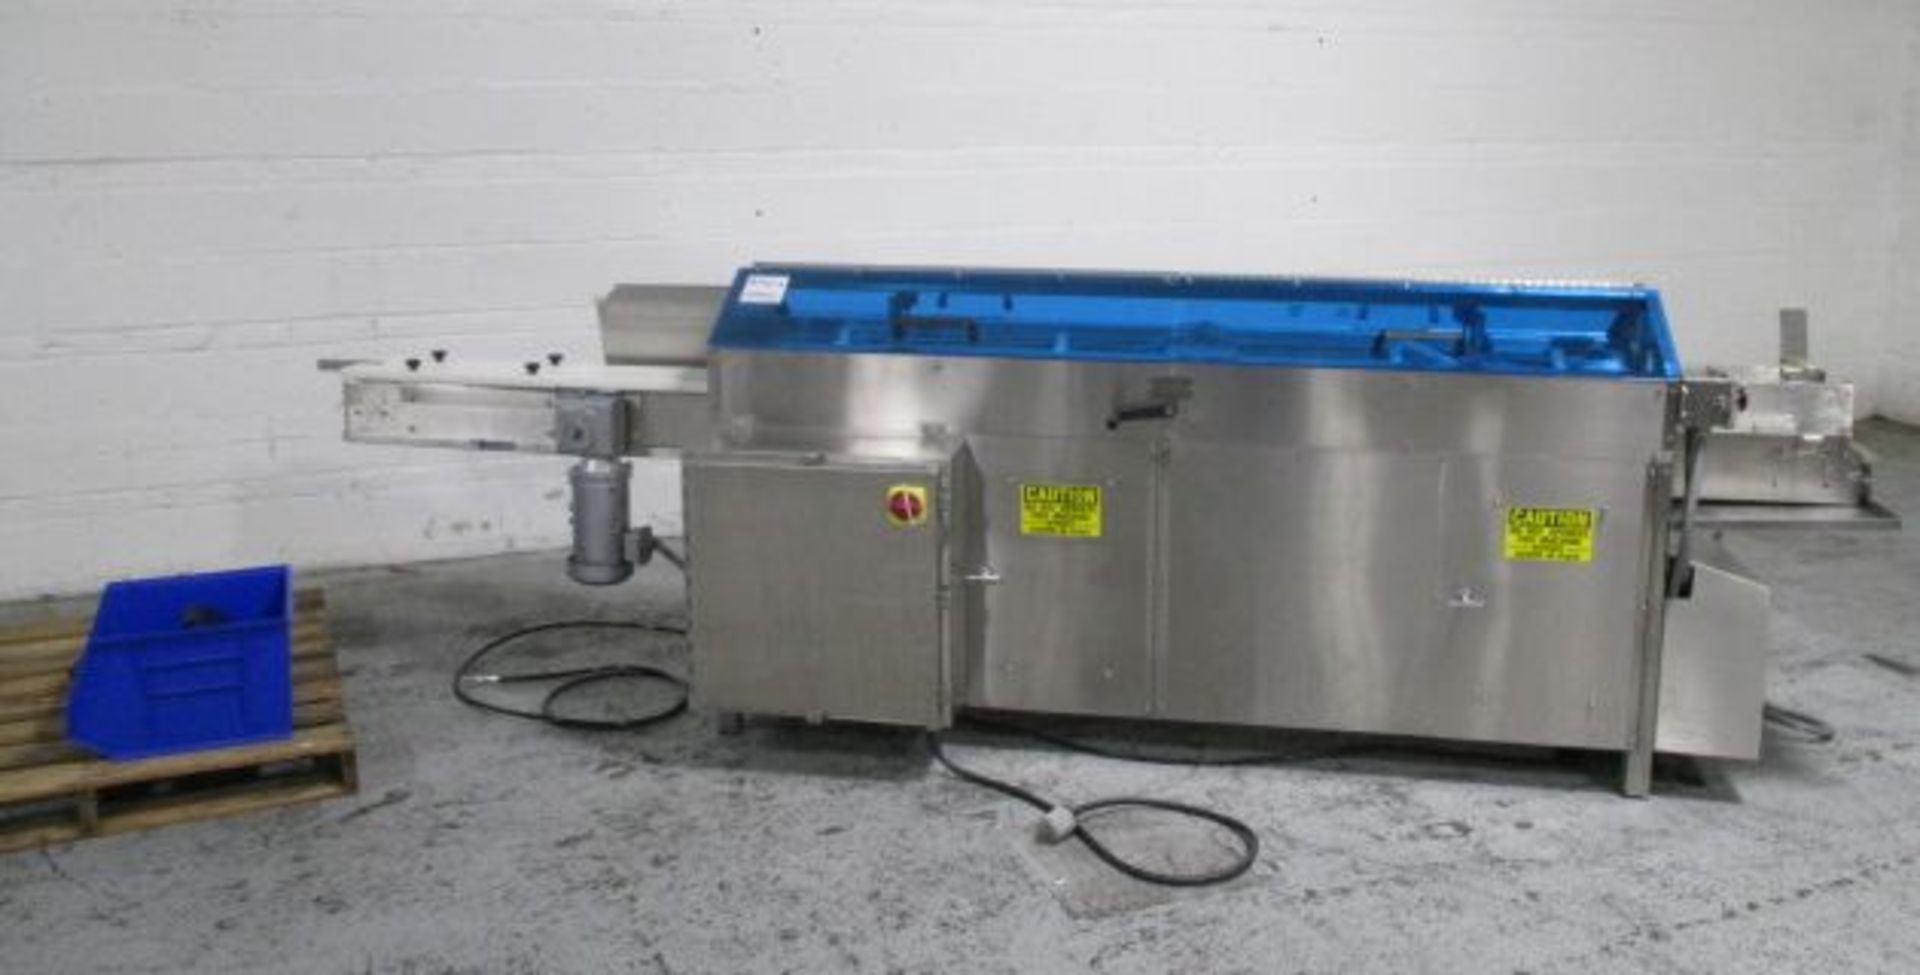 McBrady Engineering Exterior Single Pass Vial Washer/Dryer, model# 40, configured for use with